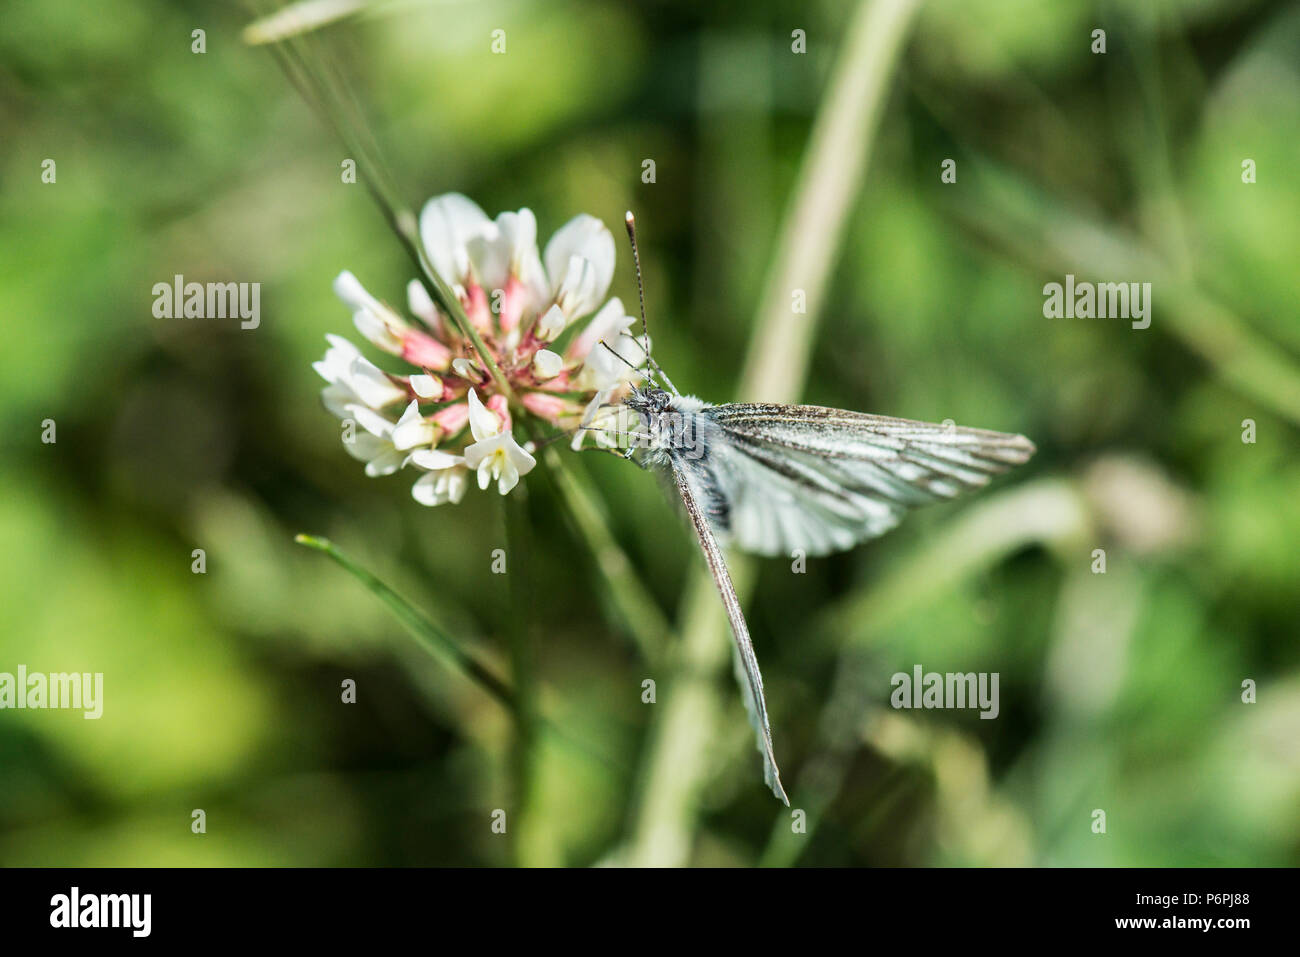 A female green-veined white butterfly (Pieris napi) on the flower of a white clover (Trifolium repens) Stock Photo